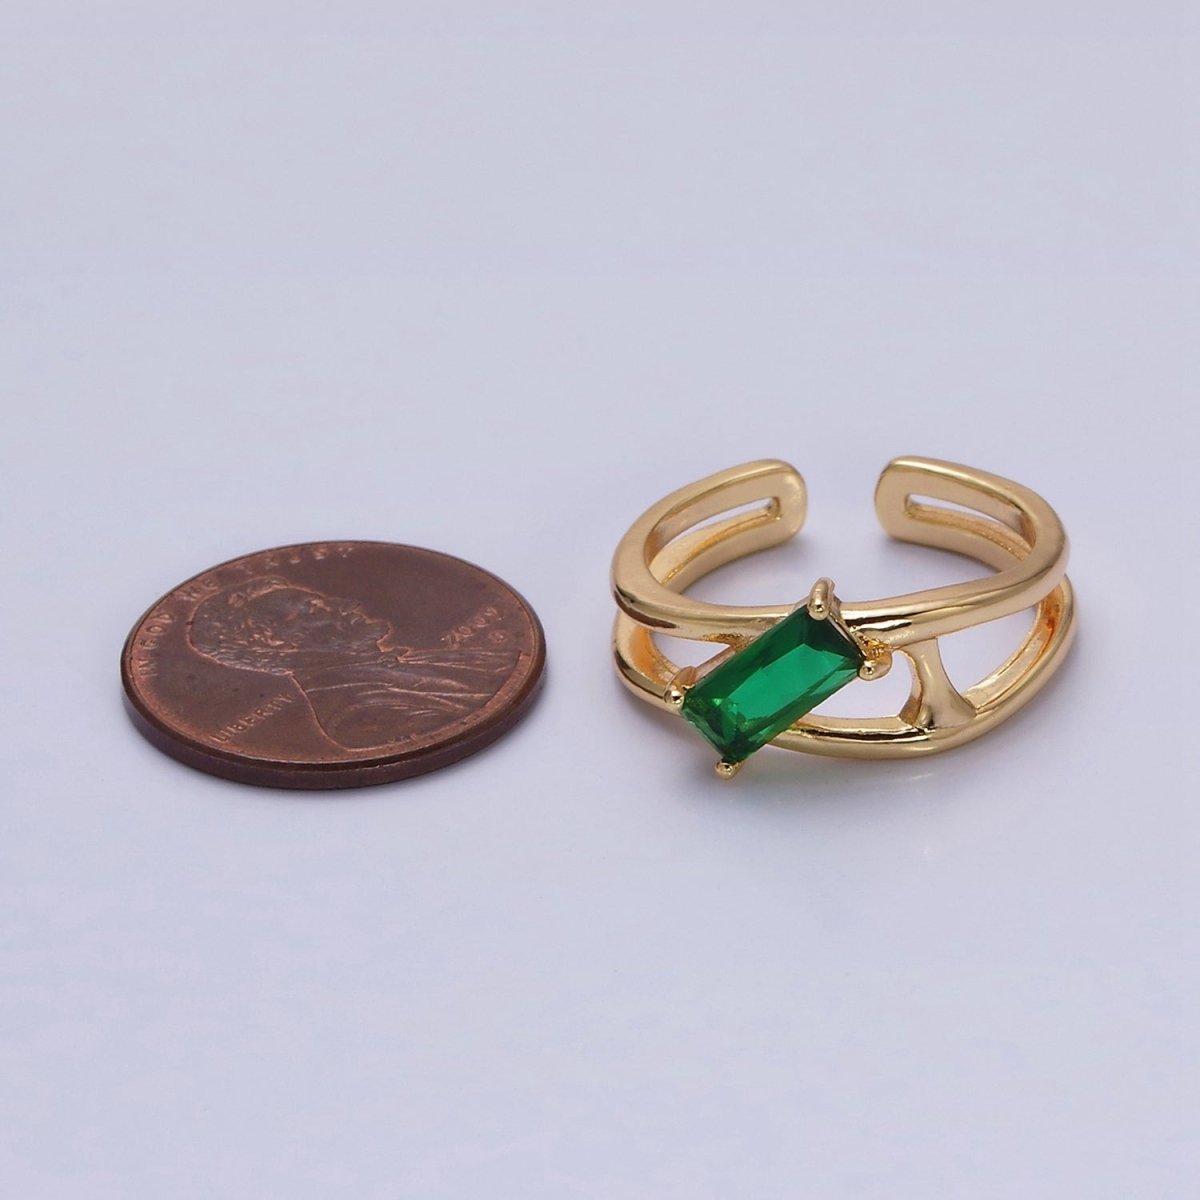 16K Gold Filled Clear, Green Baguette Molten Double Band Ring in Gold & Silver | O-1621 O-1622 O-1623 O-1624 - DLUXCA